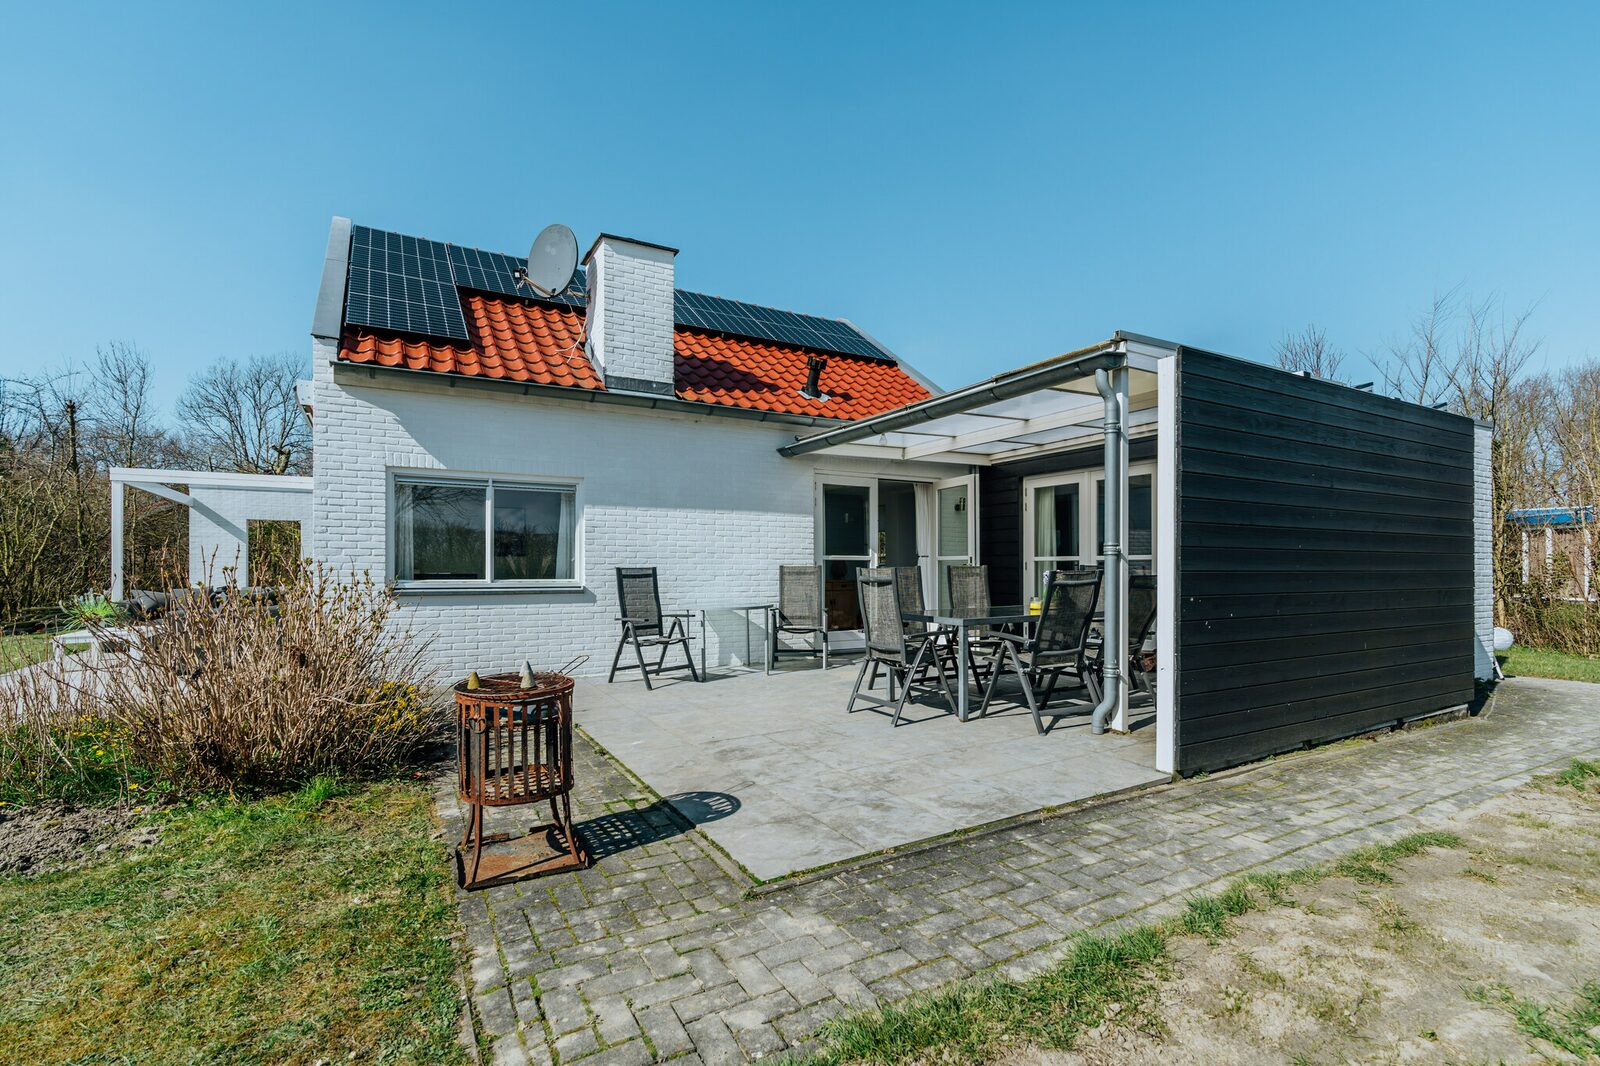 Poldersbos 3 - Ouddorp "BarLeDunes" with jacuzzi and sauna (extra costs fur use)